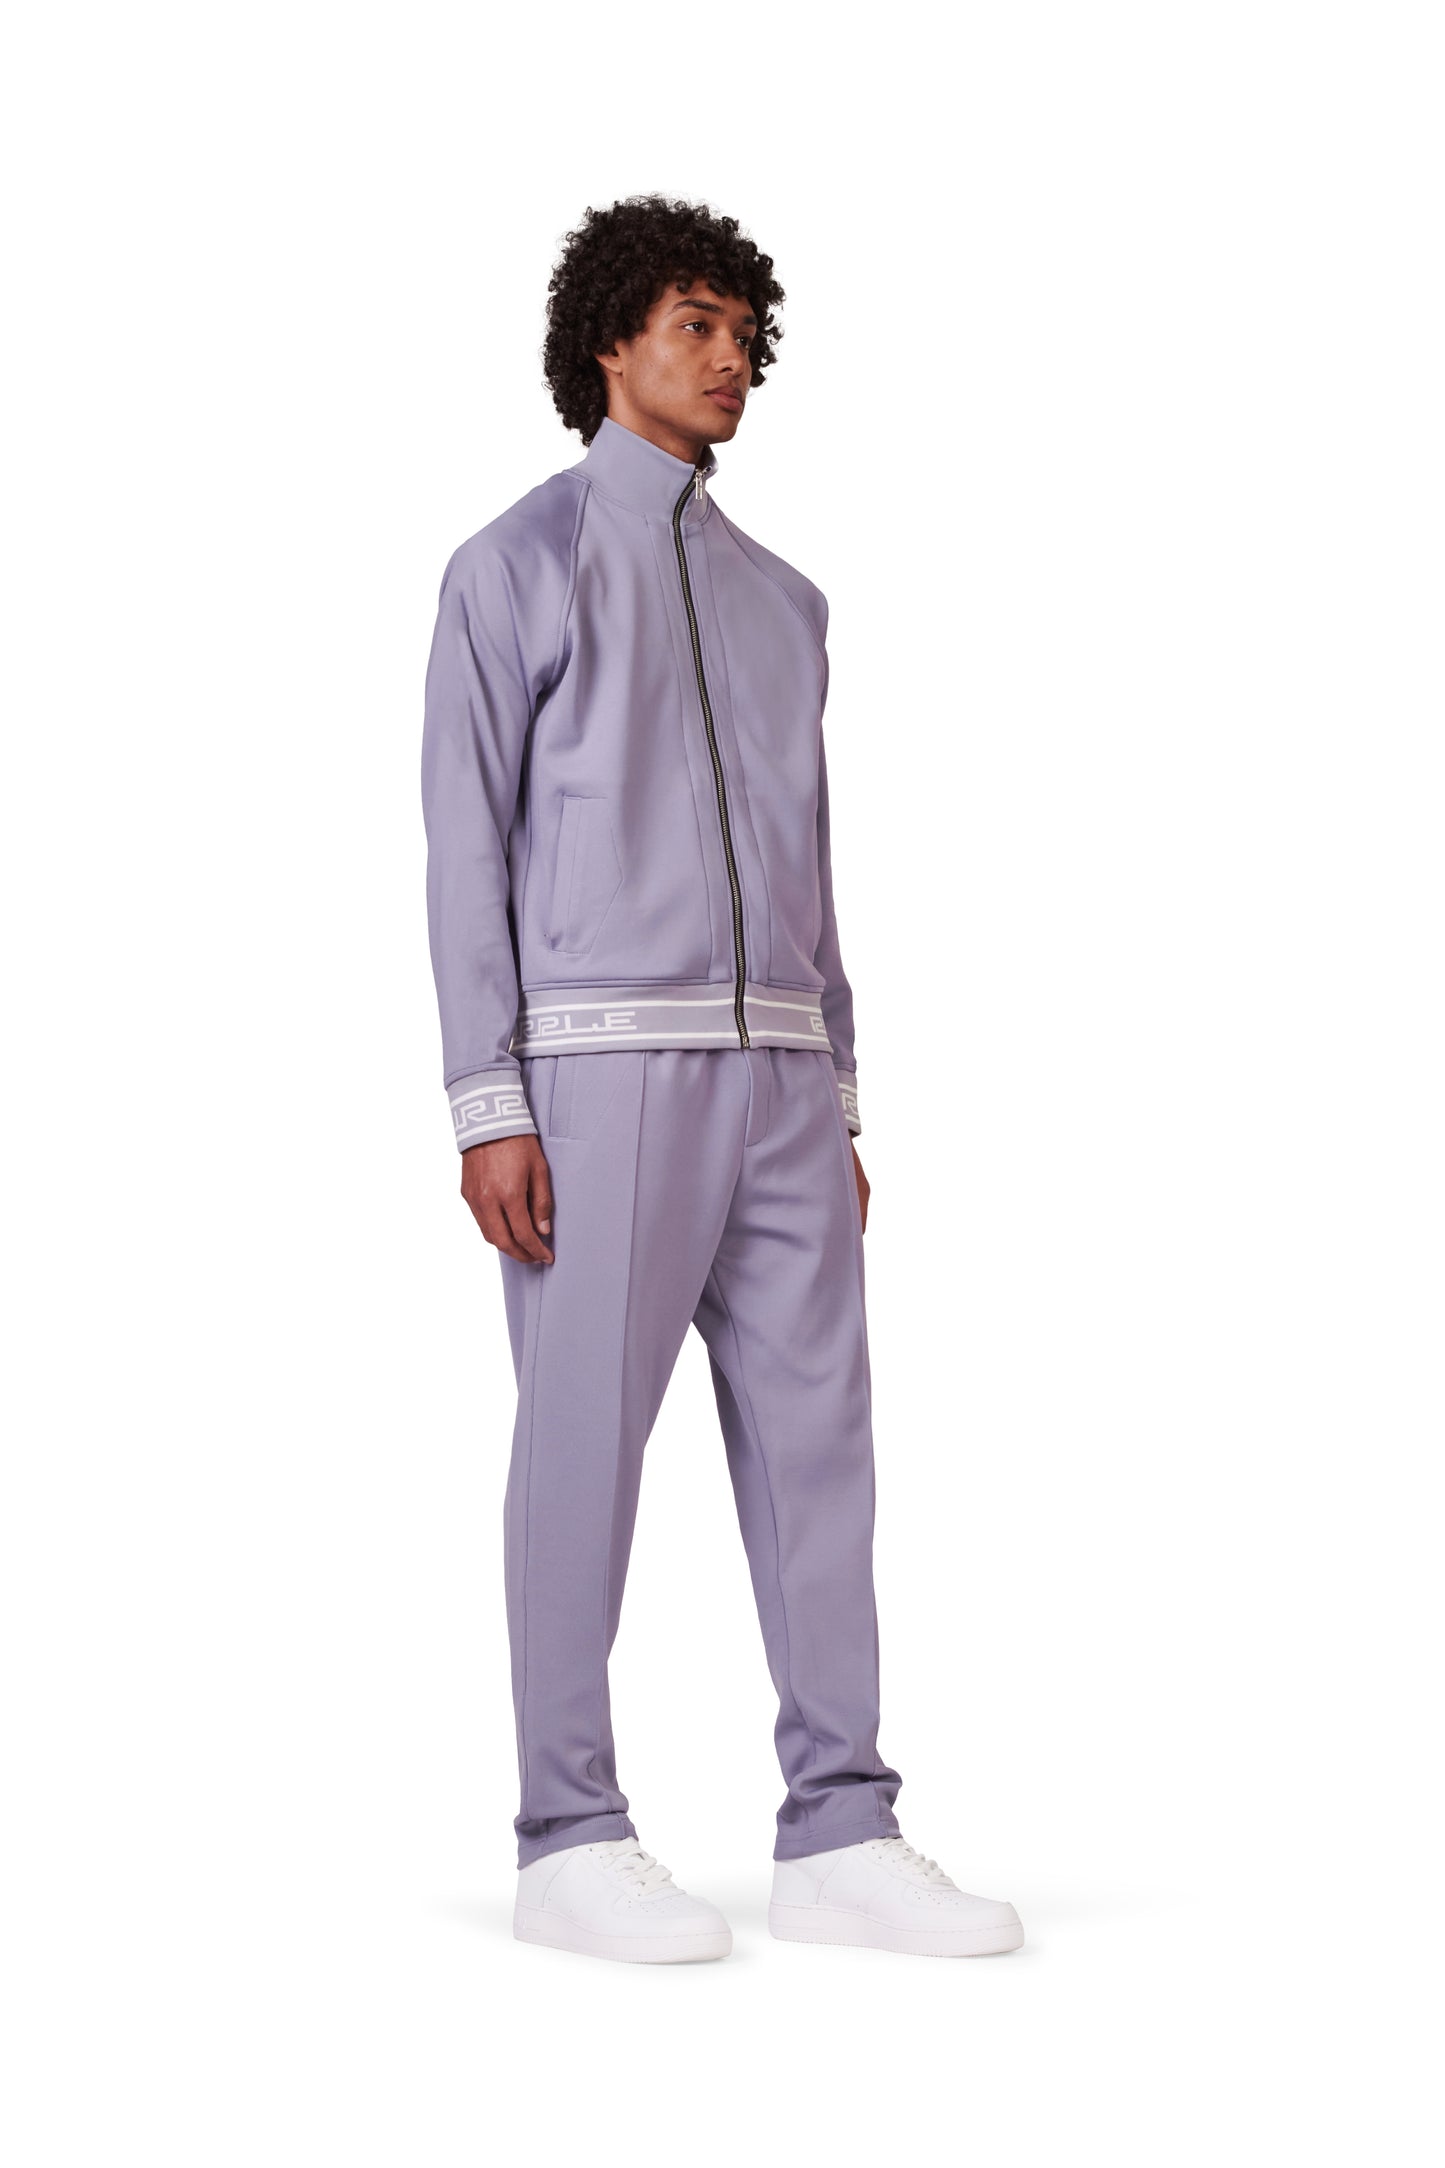 P415 TRACK PANT - Solid Poly Tricot Lavender Grey Track Pant